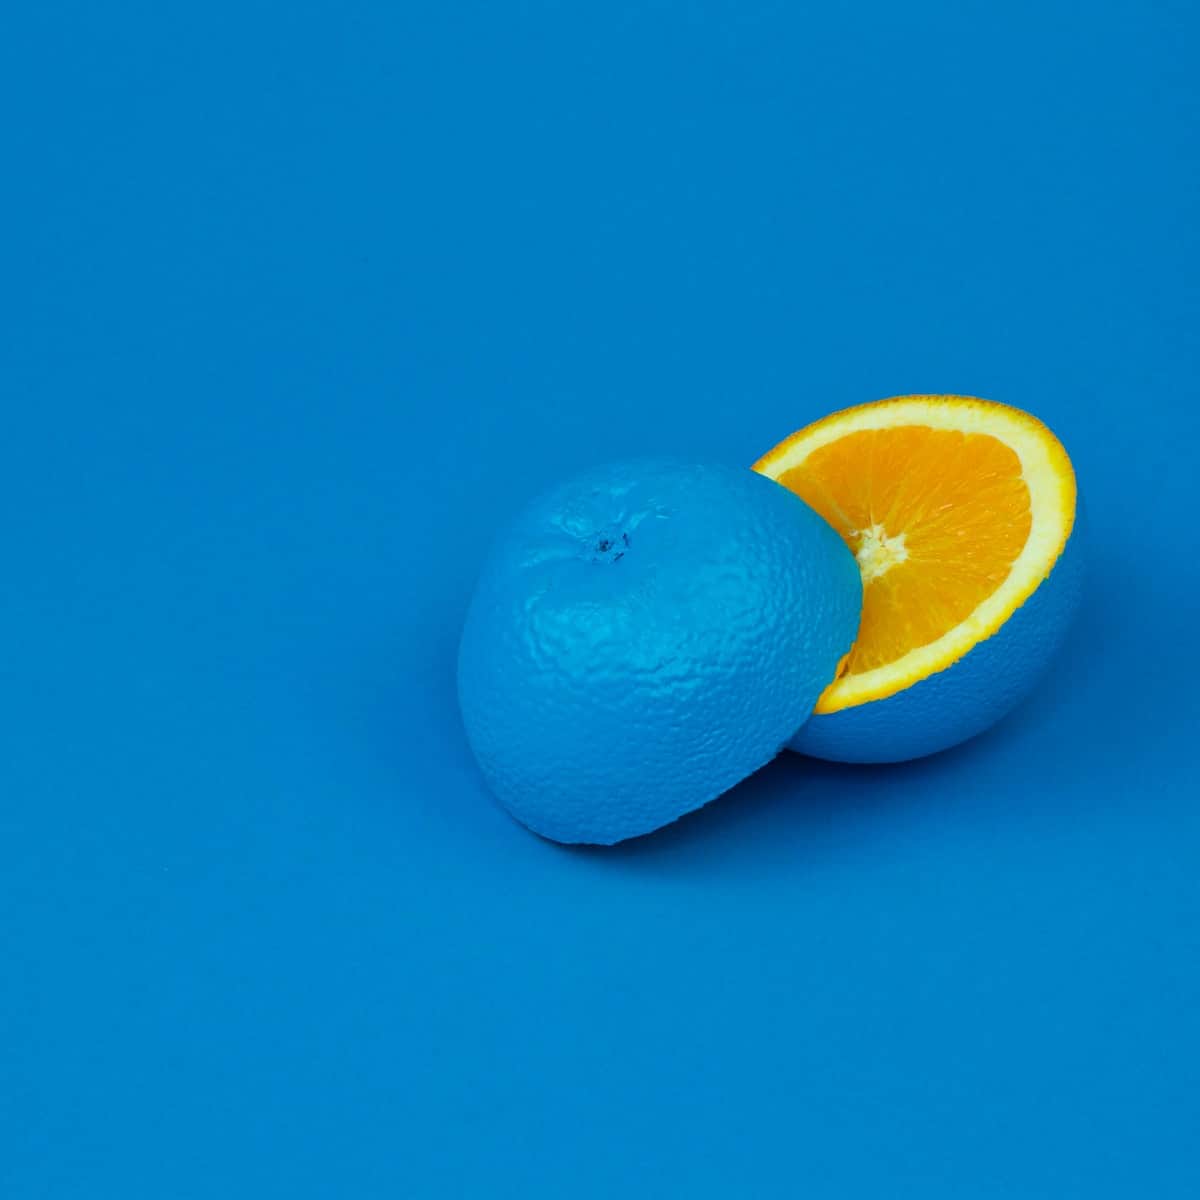 lemon sliced in half and painted blue on blue background. Represents the need for internal department change to effectively rebrand human resources